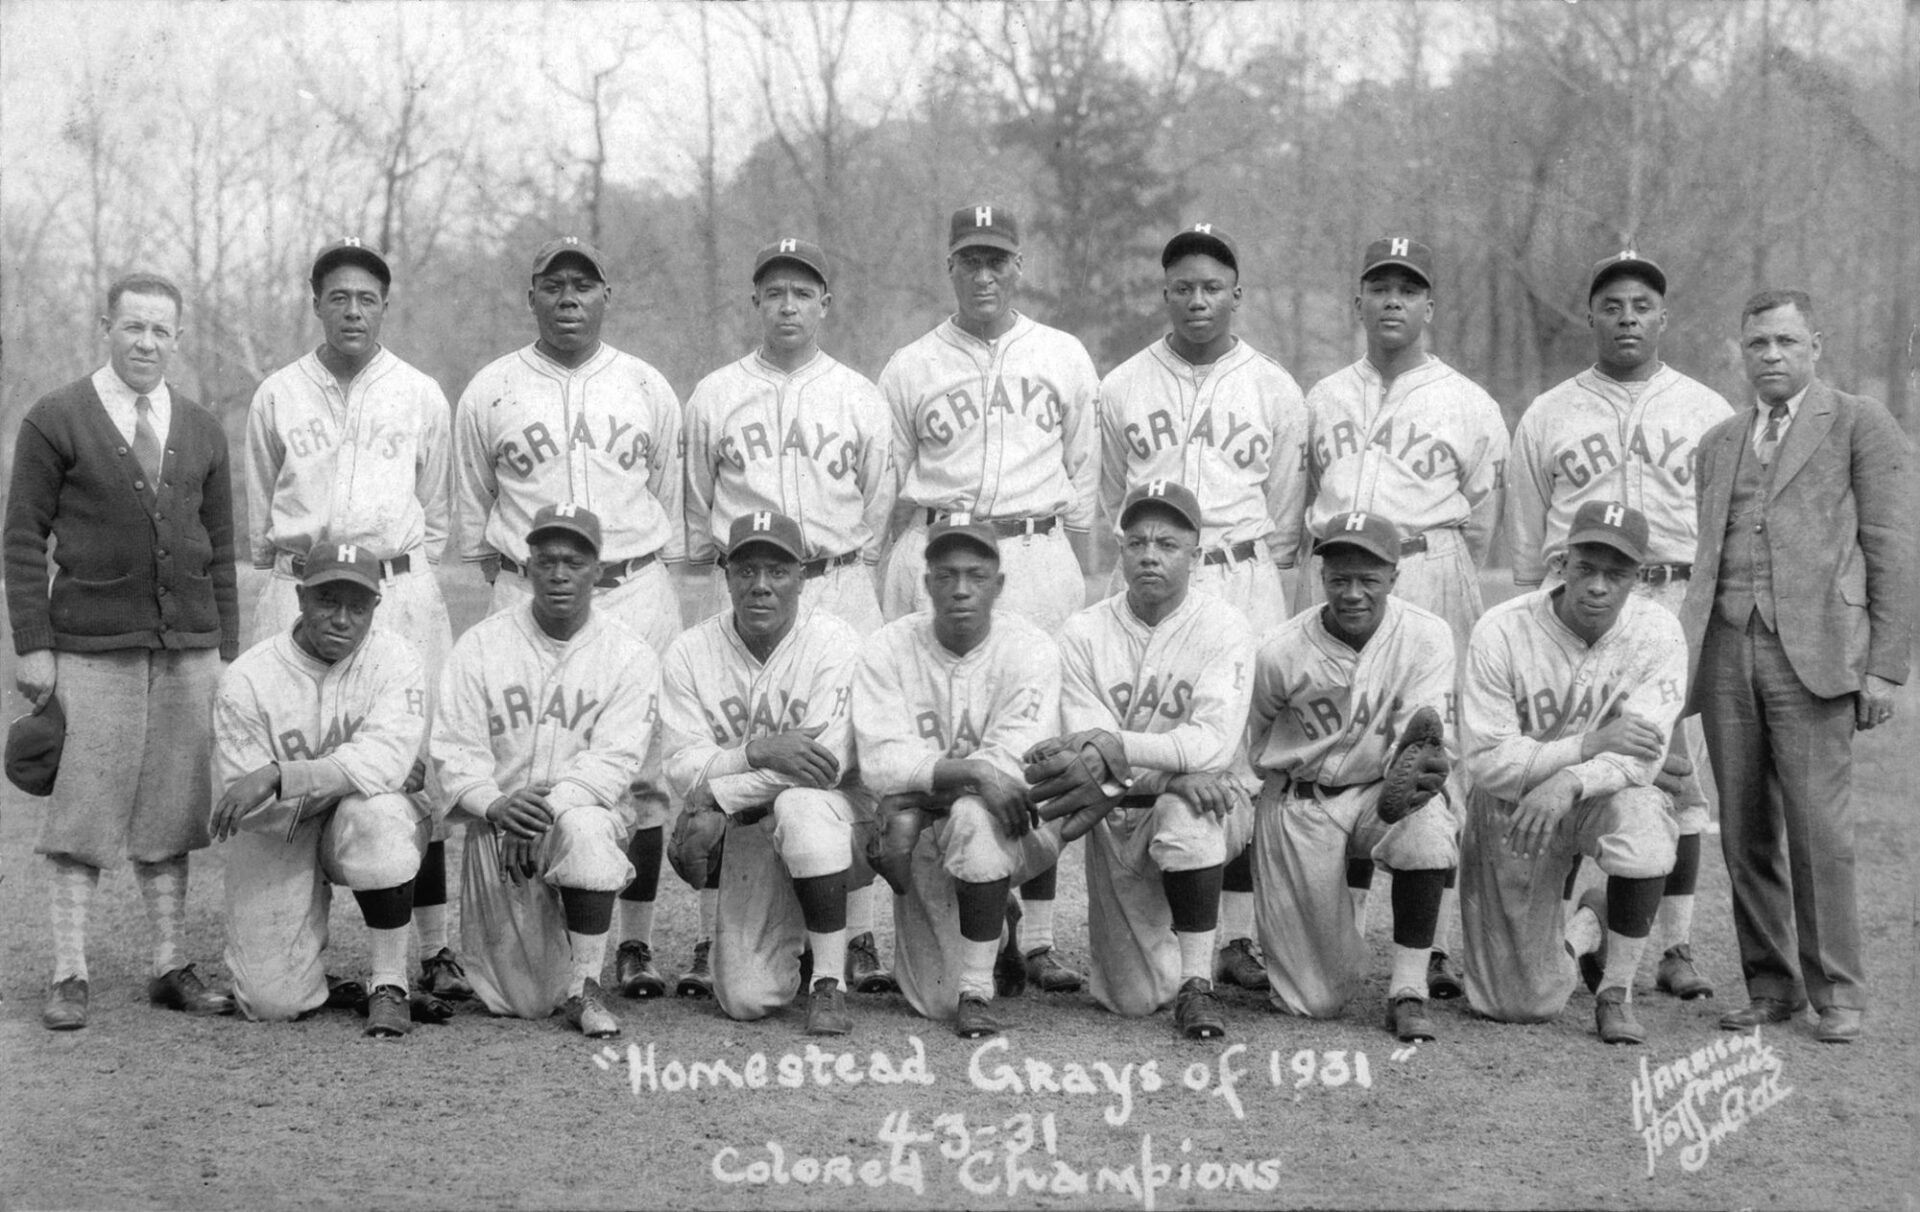 1930-31 Homestead Grays. Authorities on the Negro Leagues have made them the consensus pick as the best team ever. Standing: Cumberland Posey*, Bill Evans, Jap Washington, Red Reed, Smokey Joe Williams*, Josh Gibson*, George 